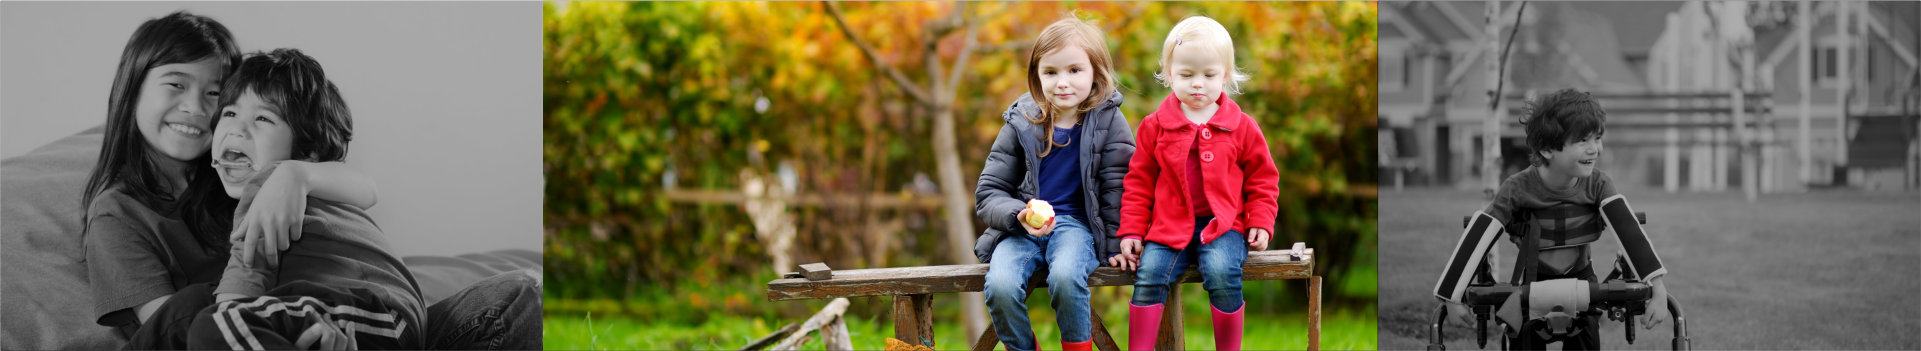 two kids sitting on a wooden bench outdoors